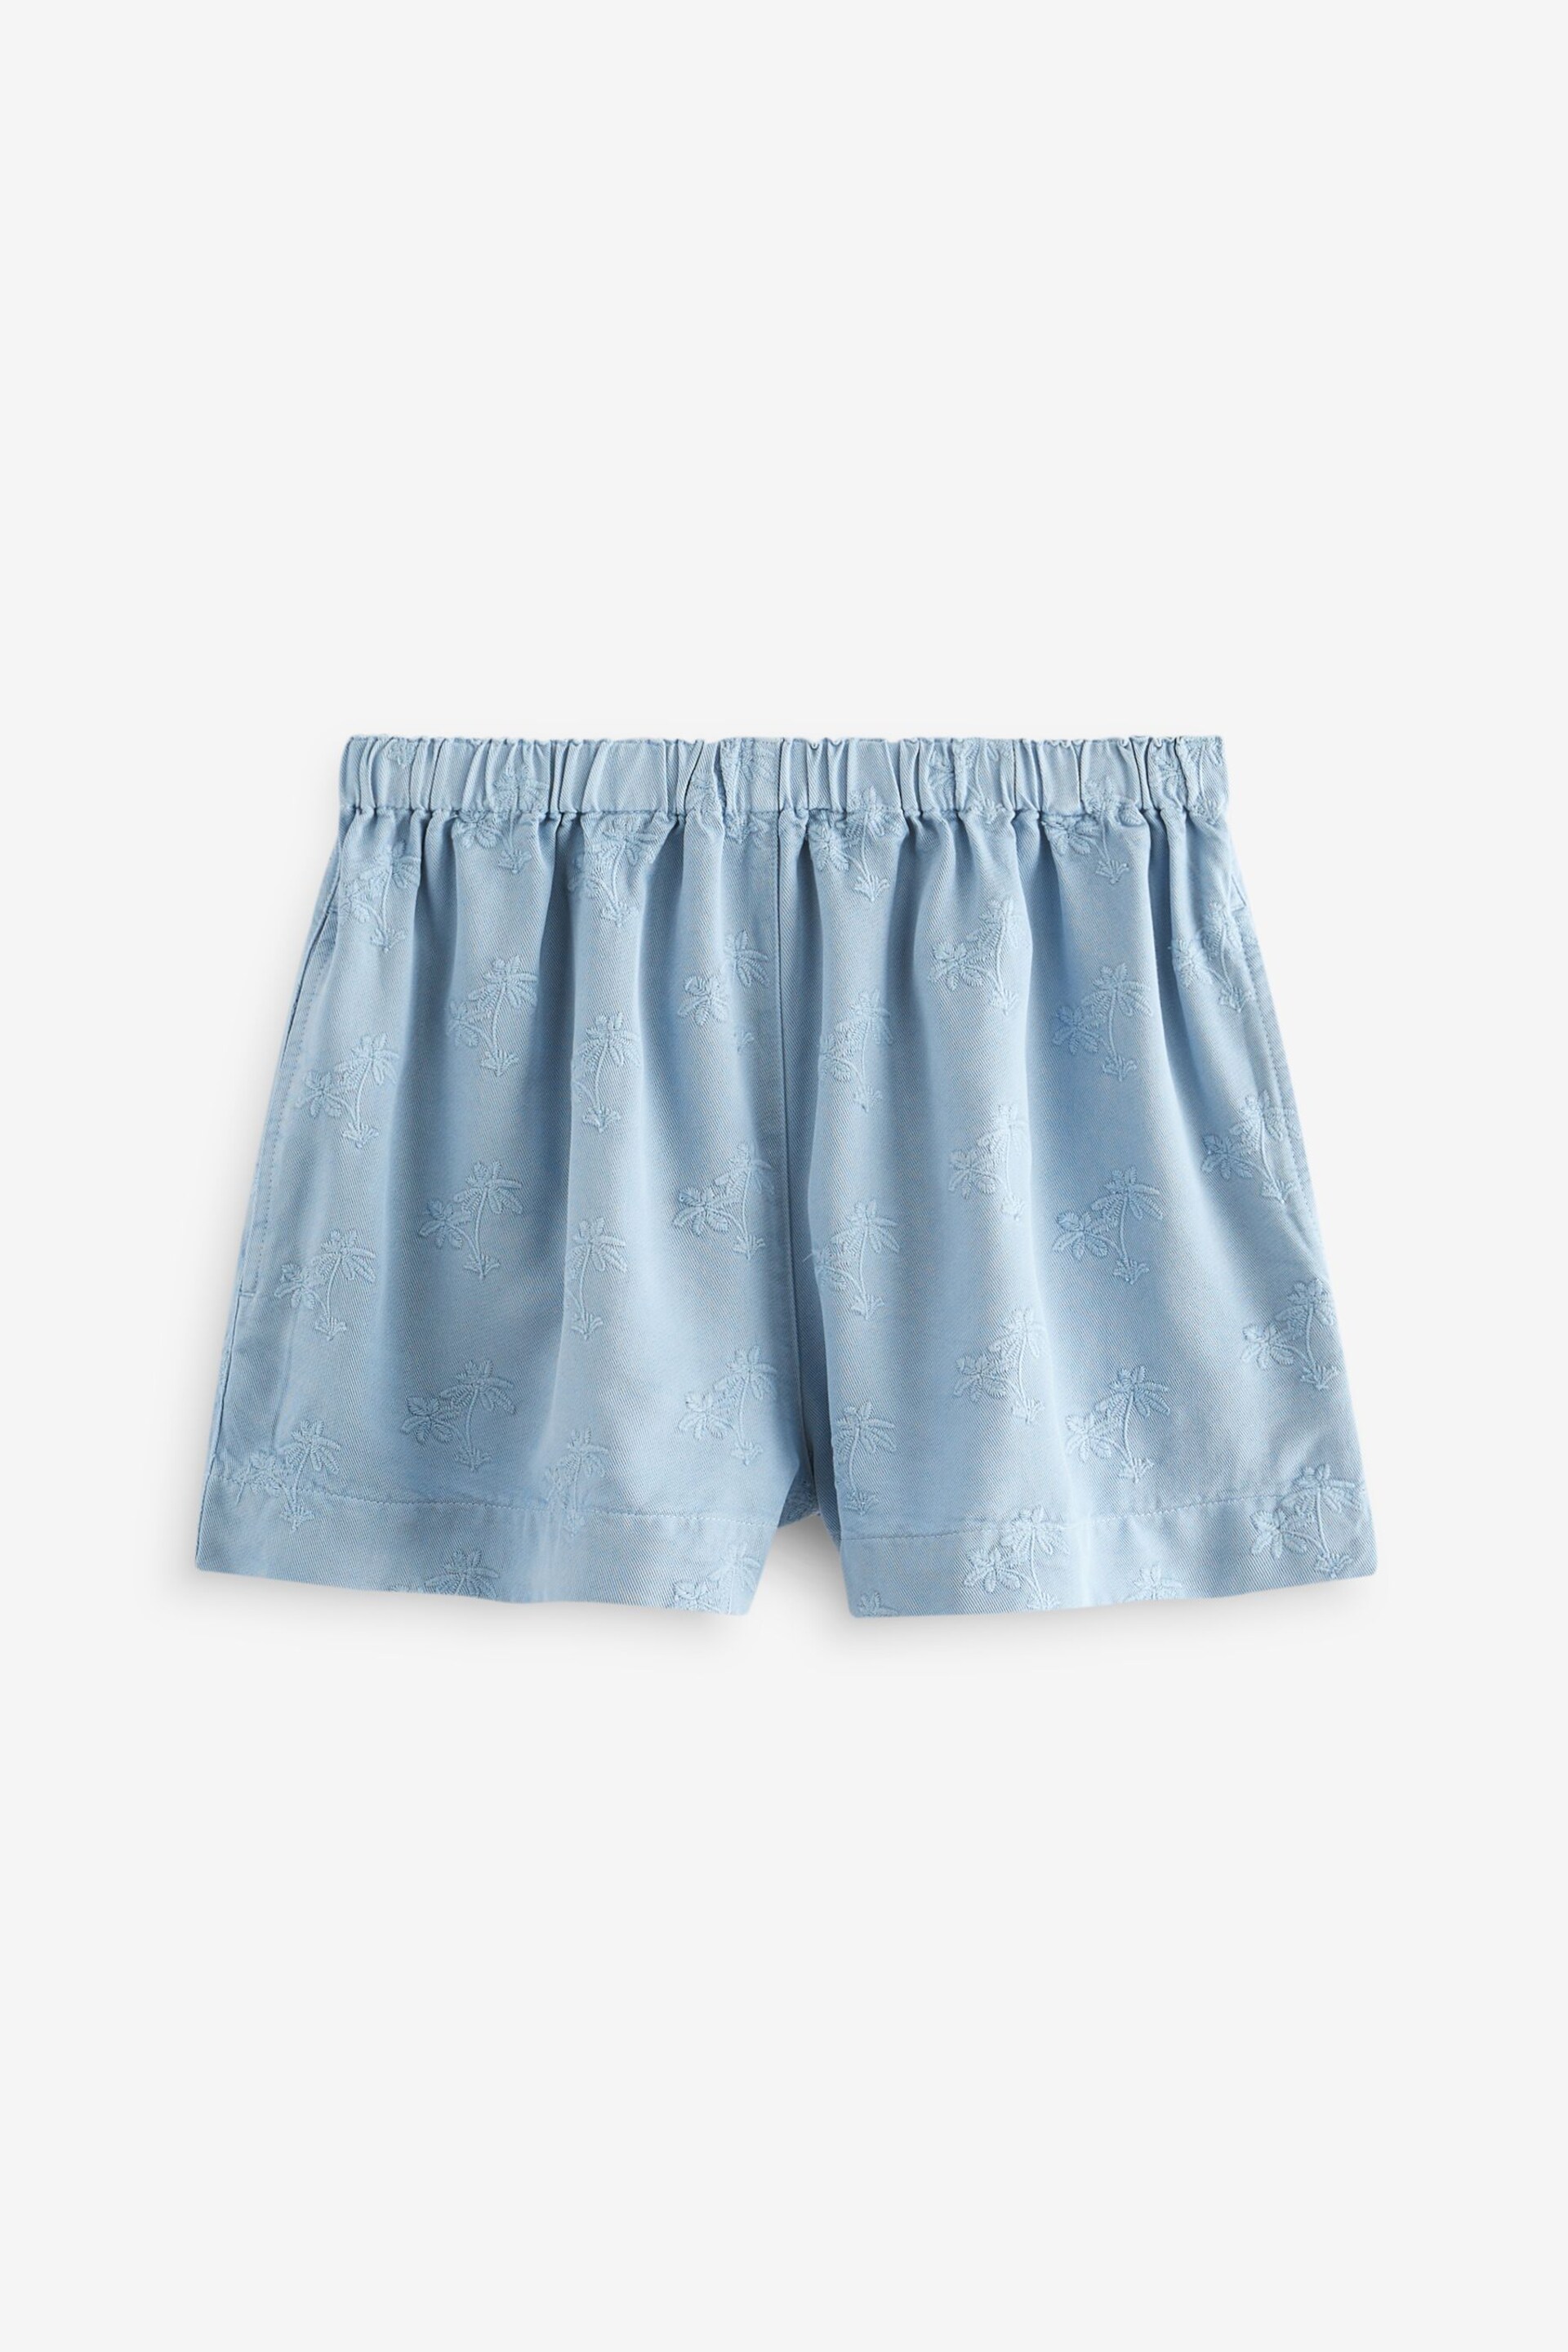 Blue Embroidered TENCEL™ Pull-On Shorts - Image 6 of 6